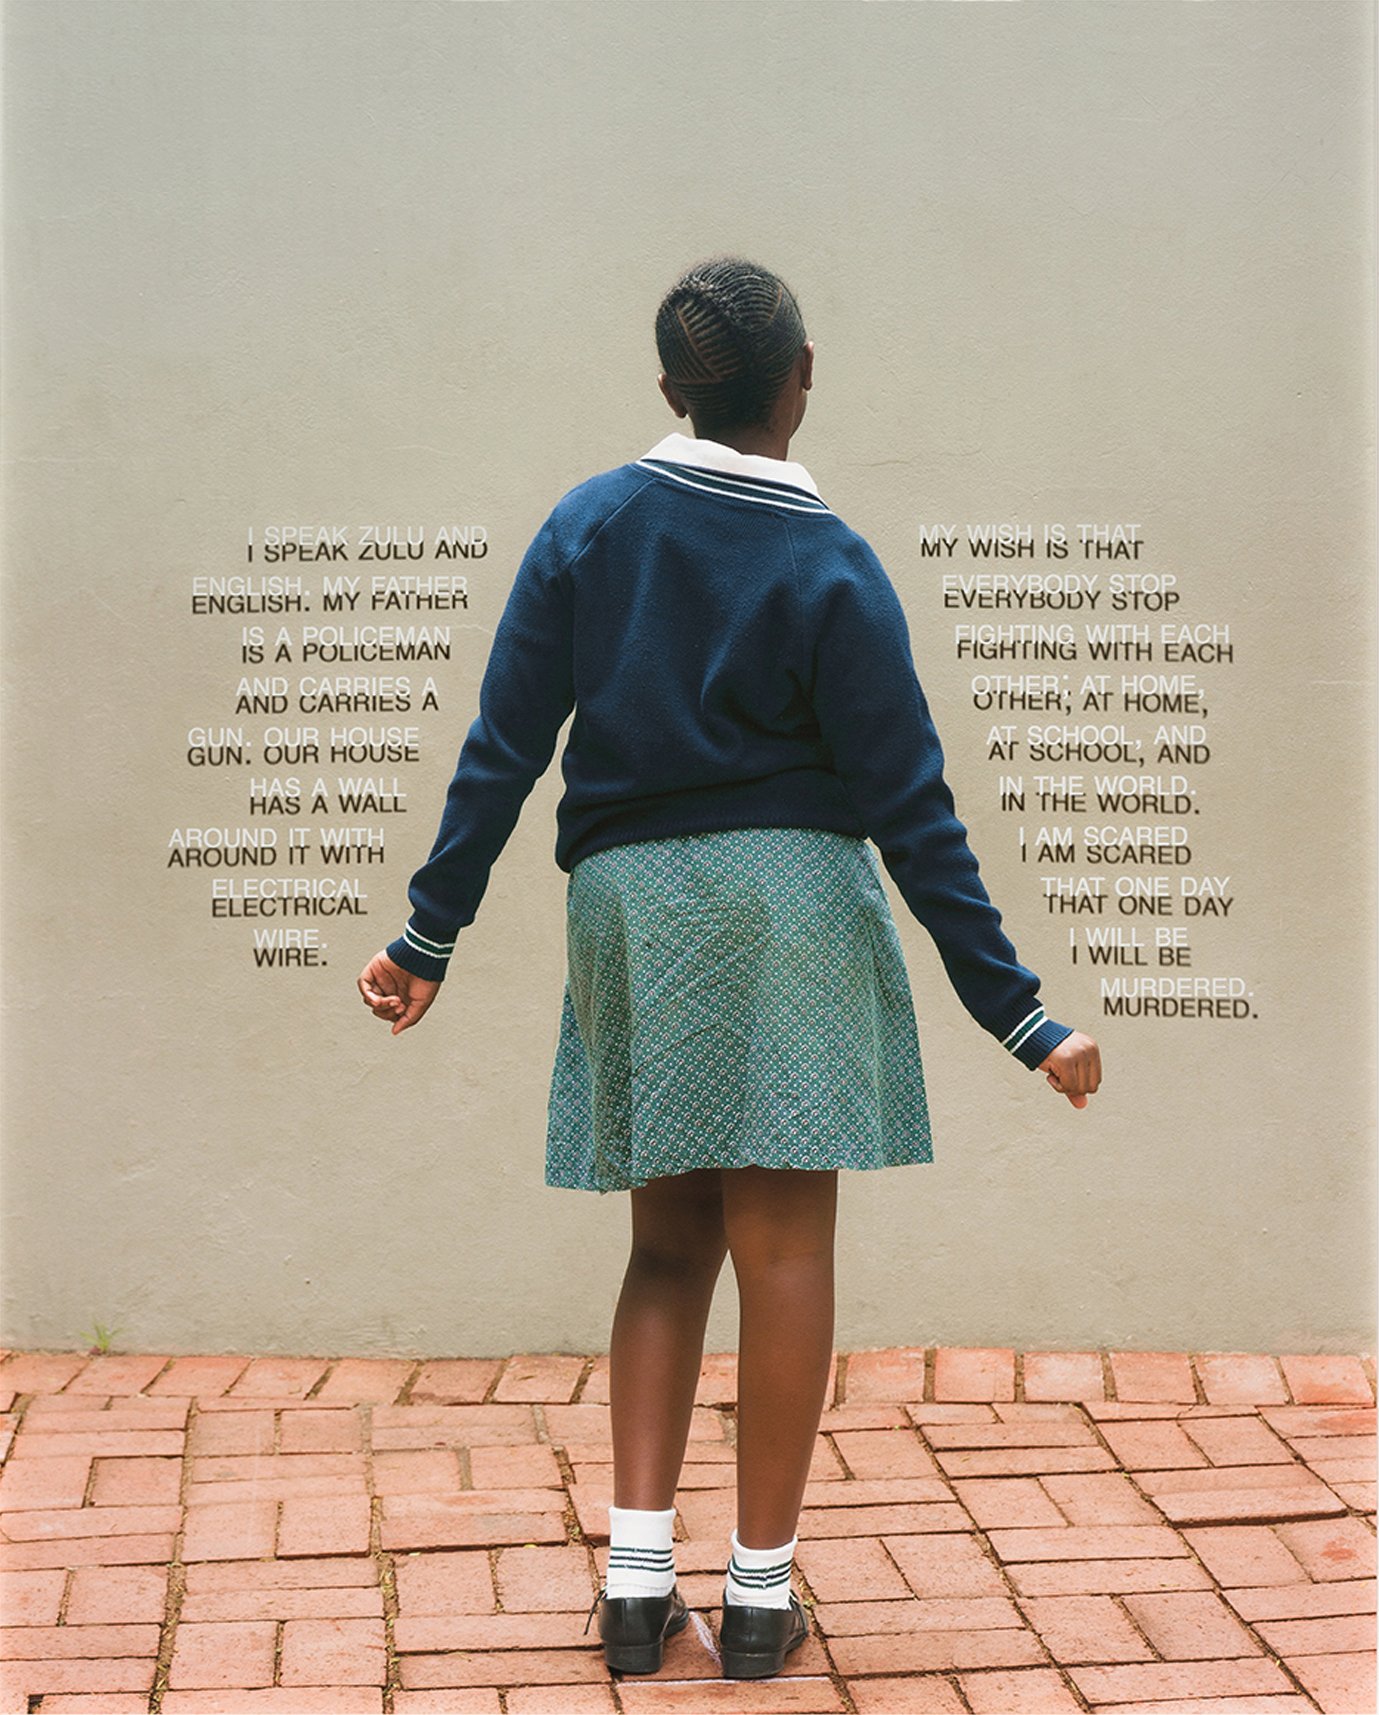 JUDY GELLES | Fourth Grade - Be Murdered (South Africa: Public School), 31.25 x 25 inches / 79.4 x 63.5 cm, framed shadow box, archival pigment print - text printed on plexiglass, edition 1/7, 2018